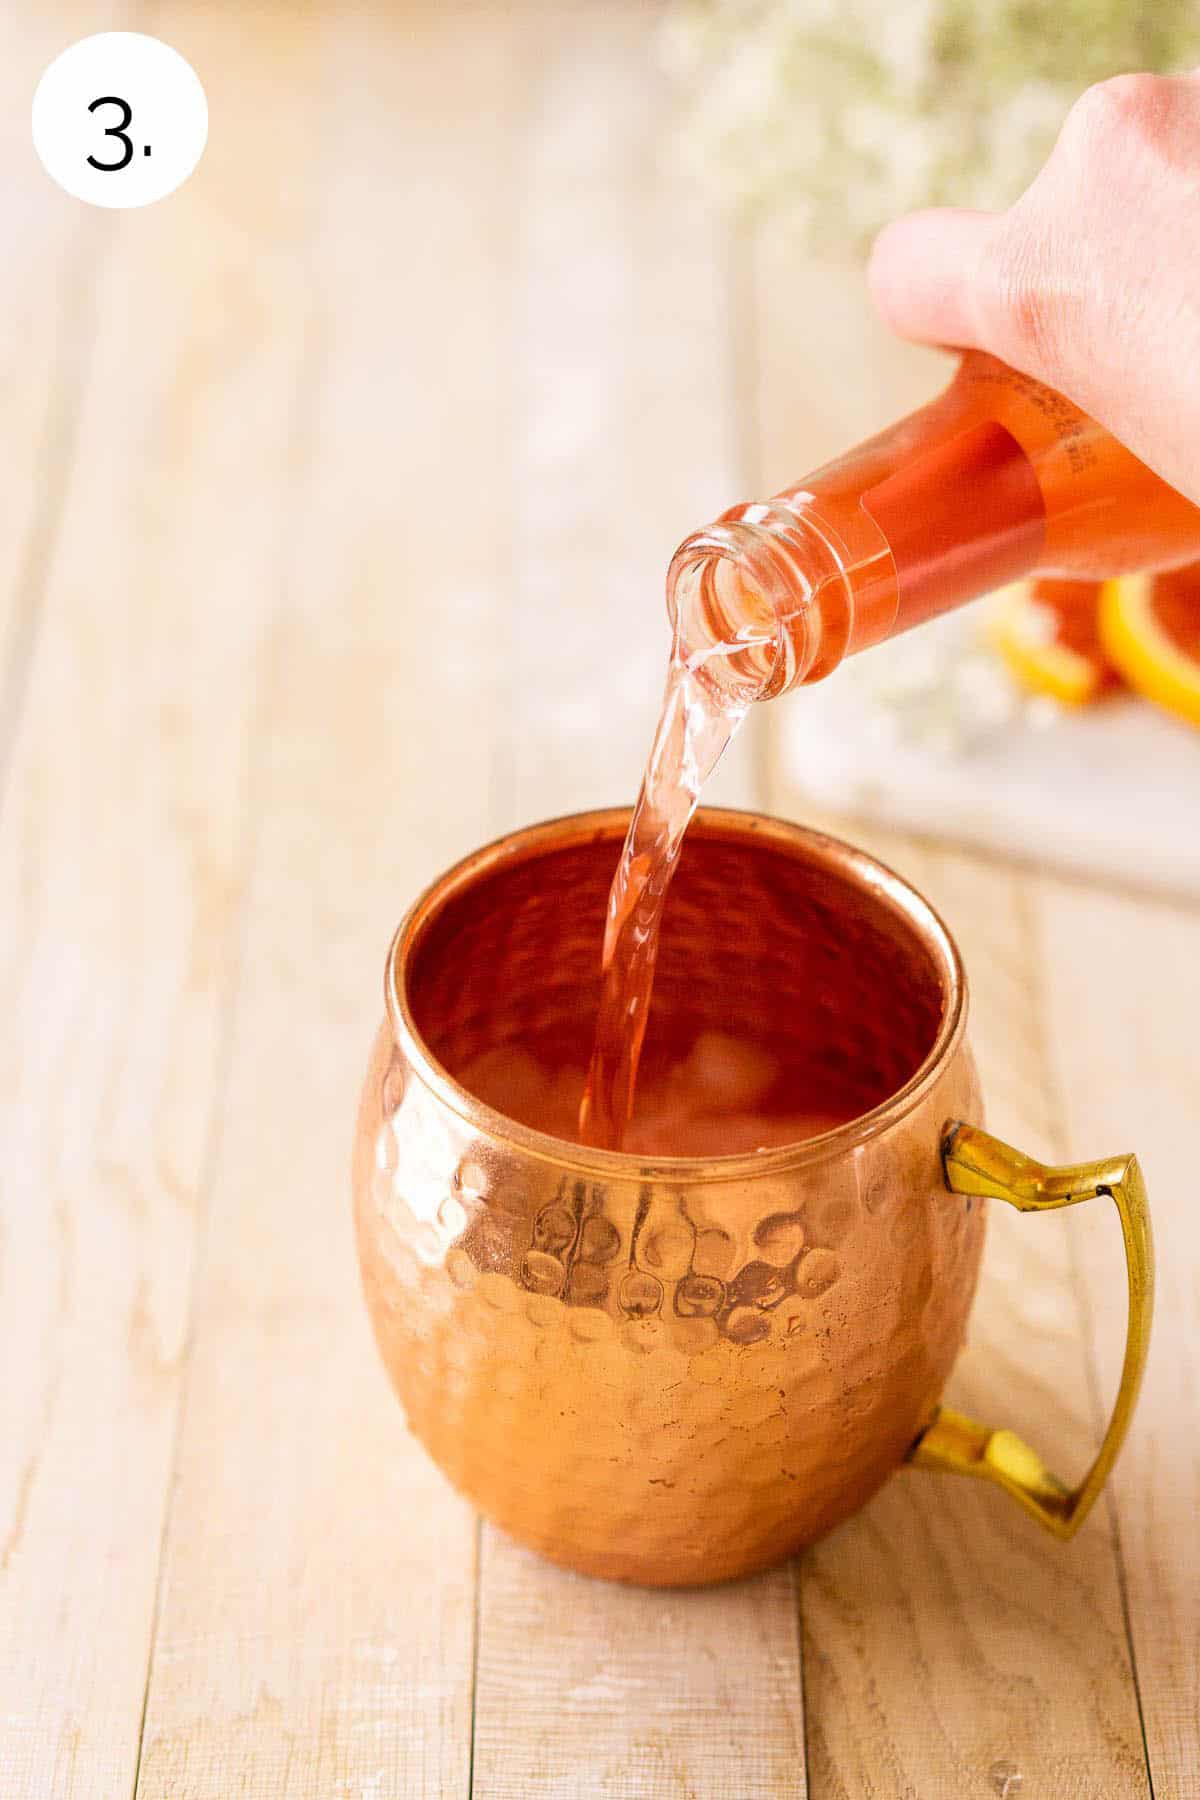 A hand pouring a bottle of blood orange ginger beer into the copper mug on a cream-colored wooden surface.